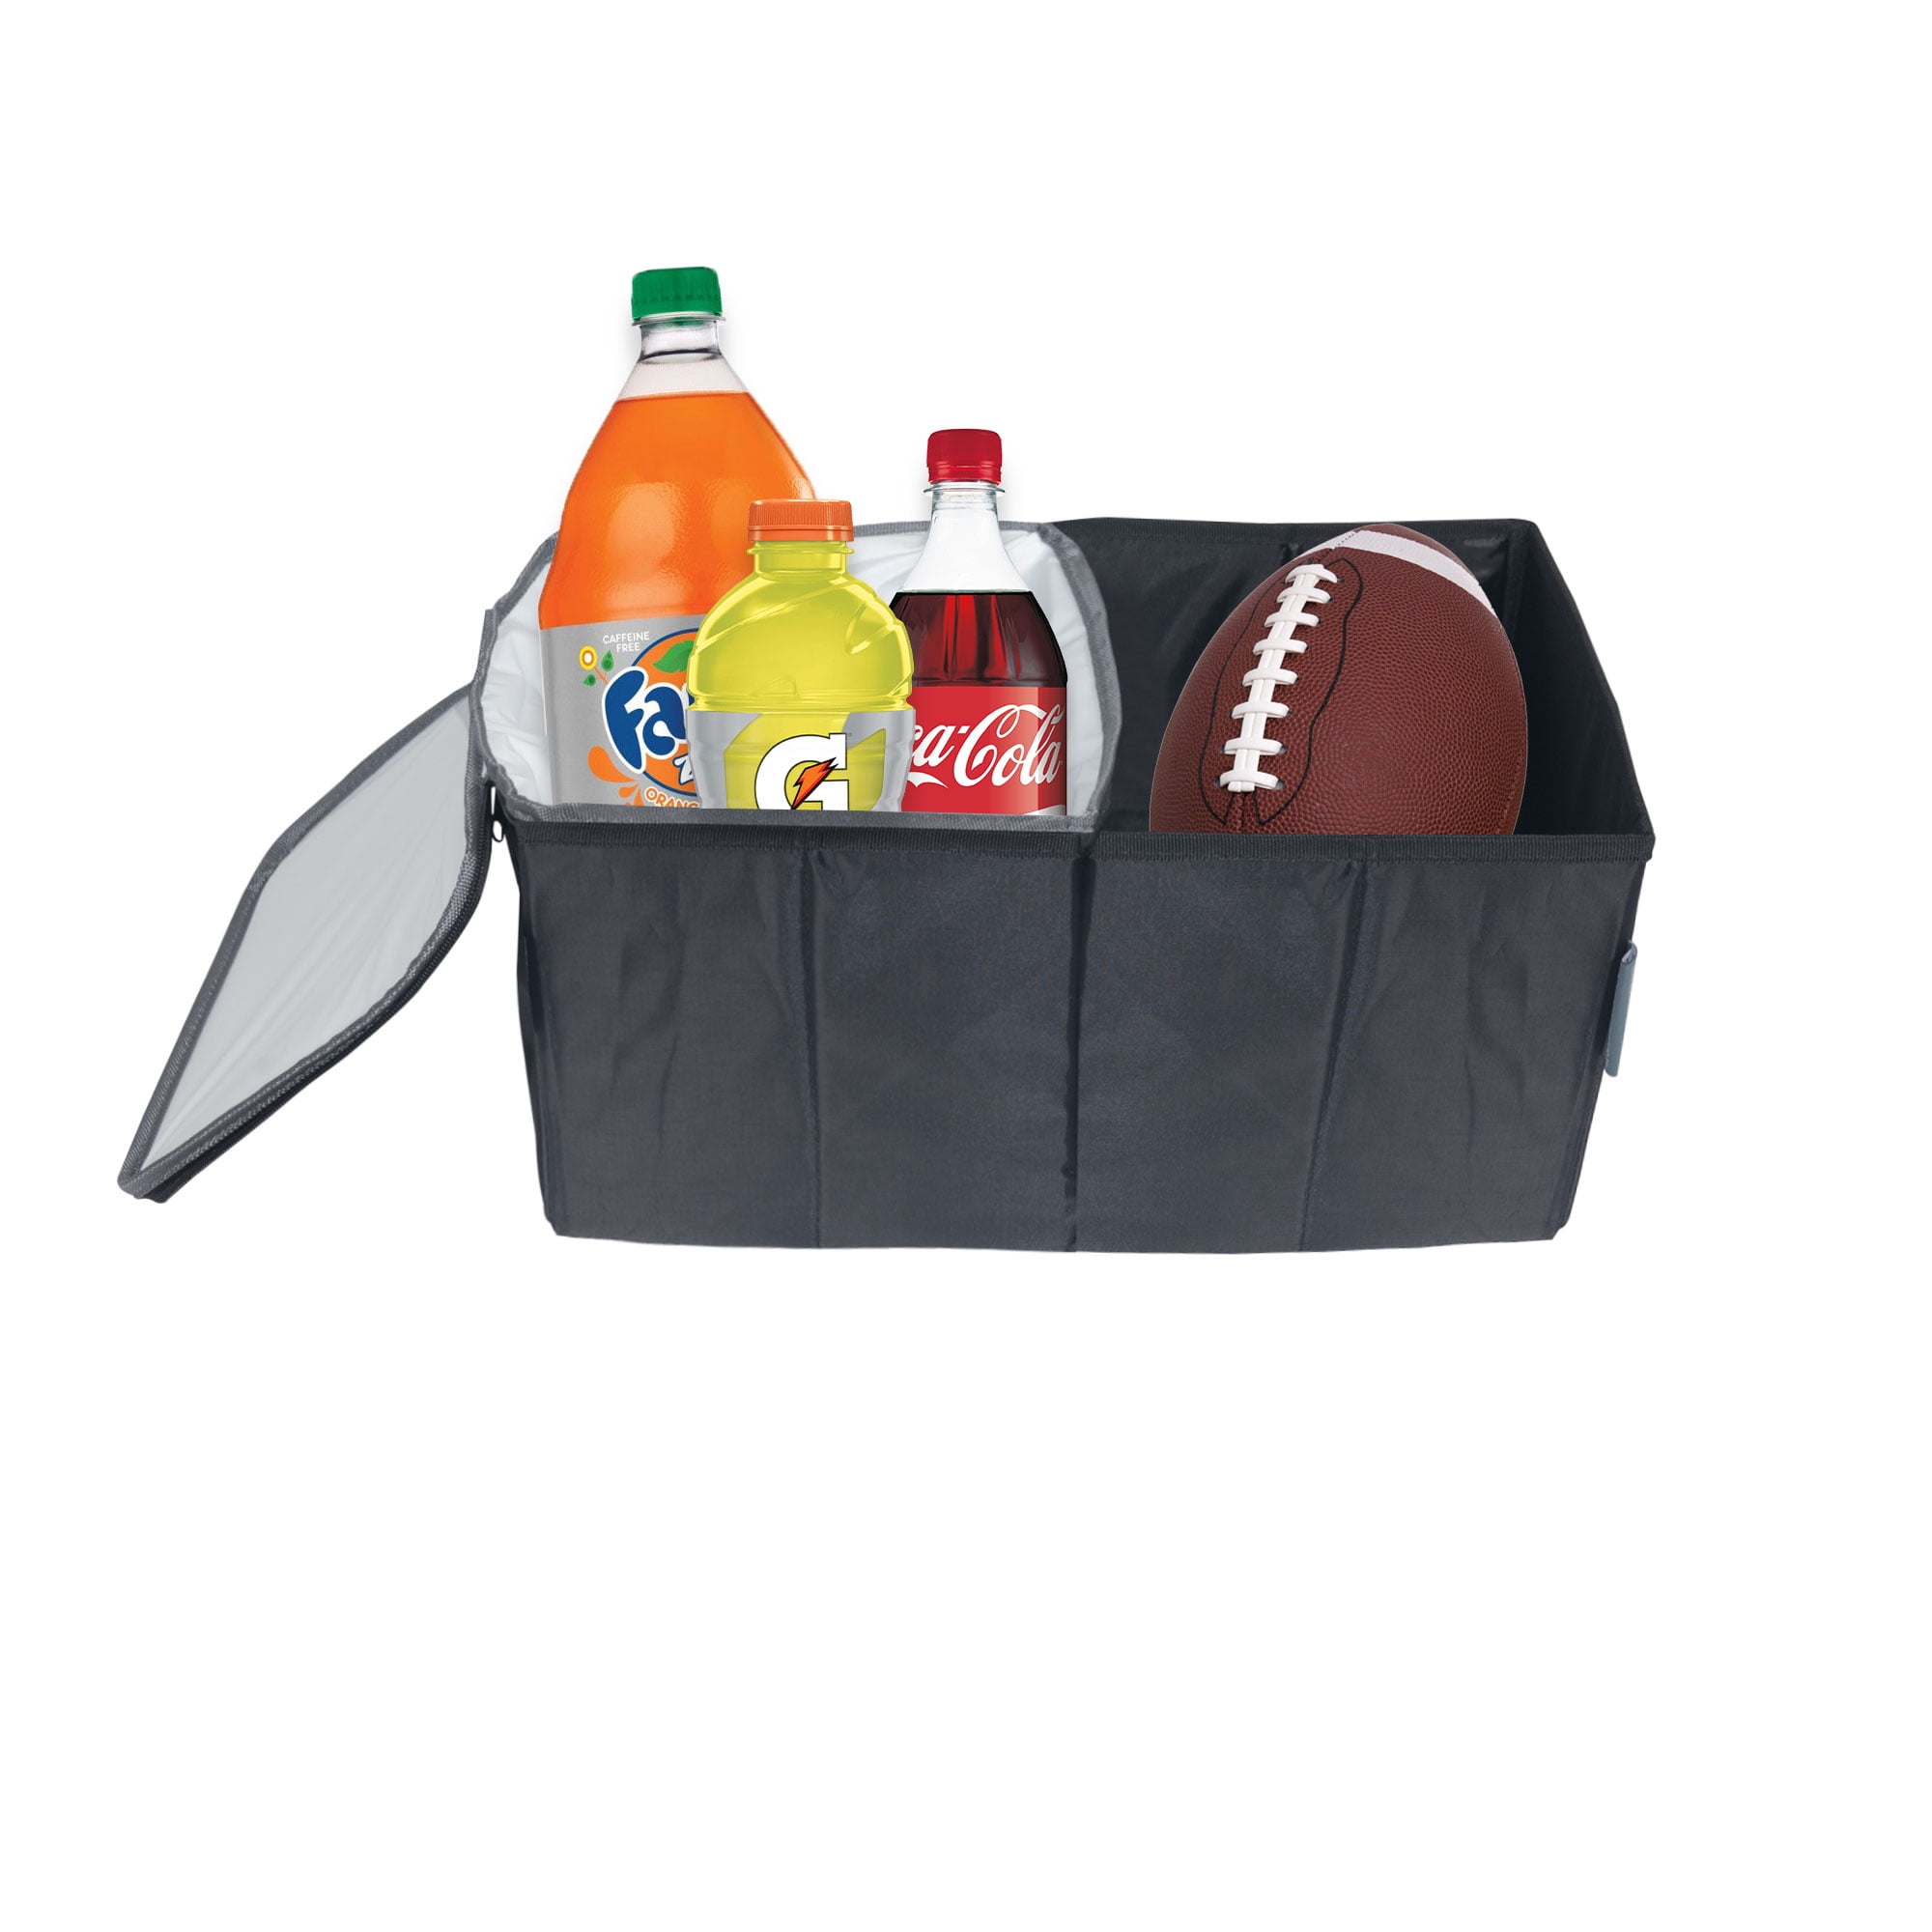 Collapsible Trunk Cooler